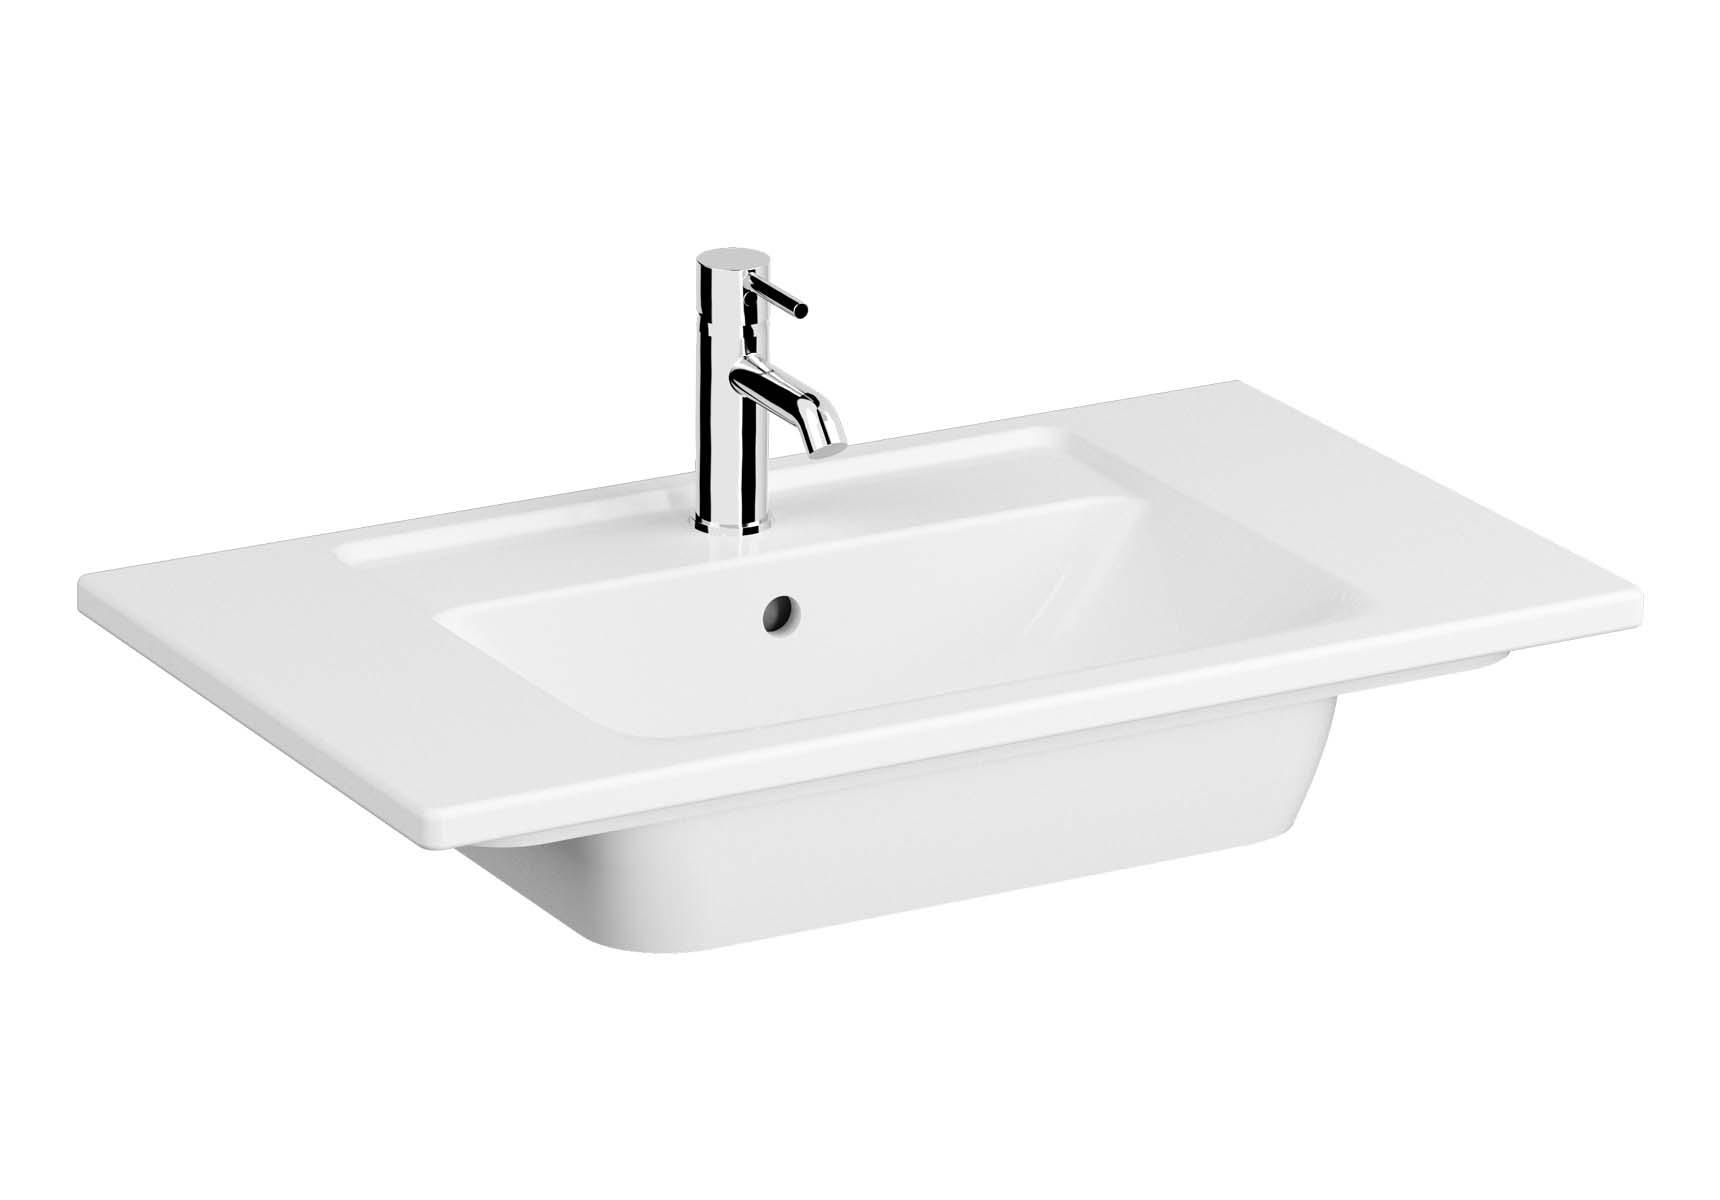 Vanity Basin, 80 cm, One Tap Hole, With Overflow Hole